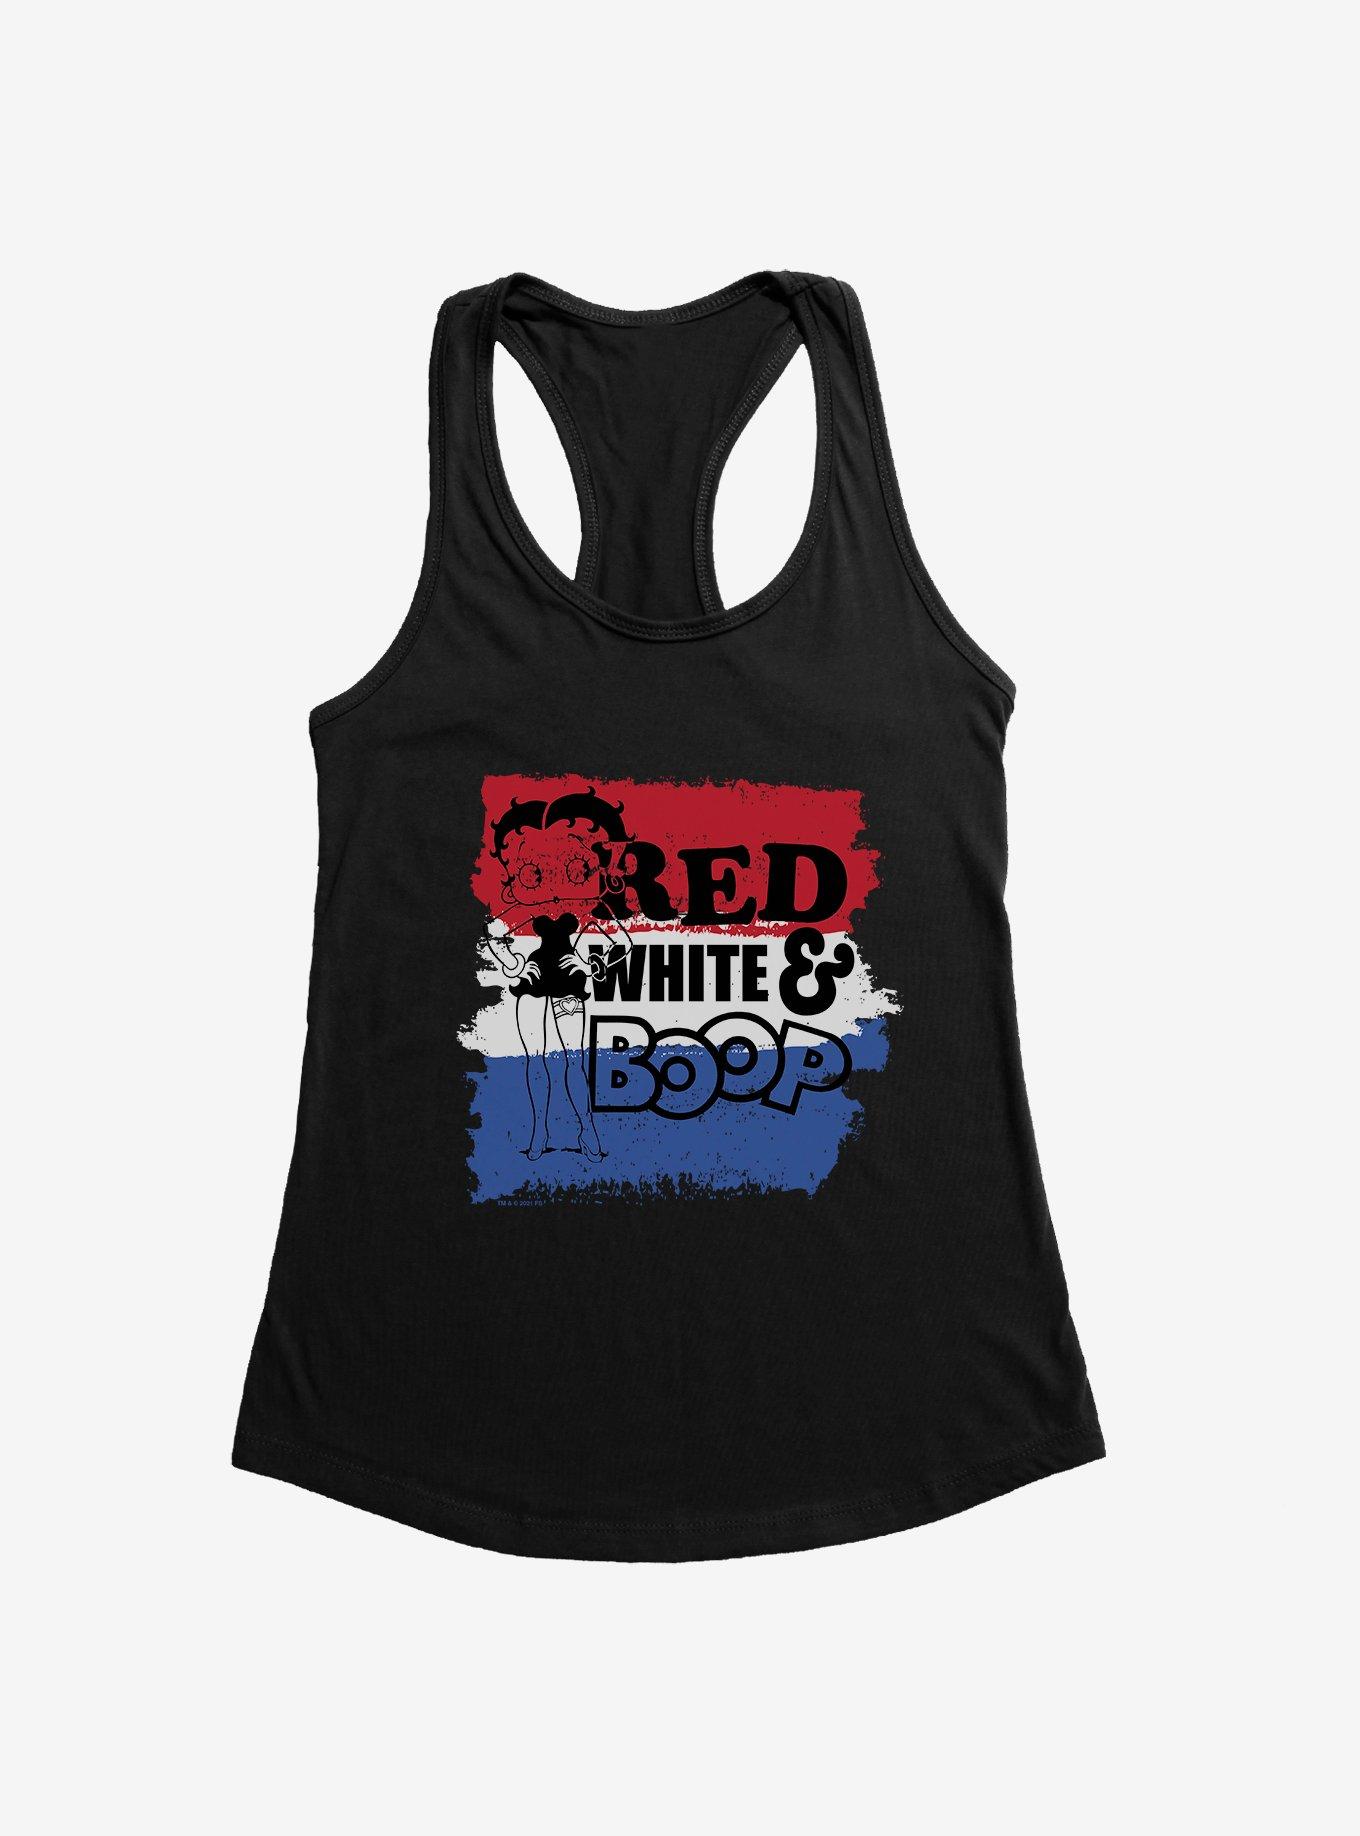 Betty Boop Black Red White and Boop Girls Tank, , hi-res